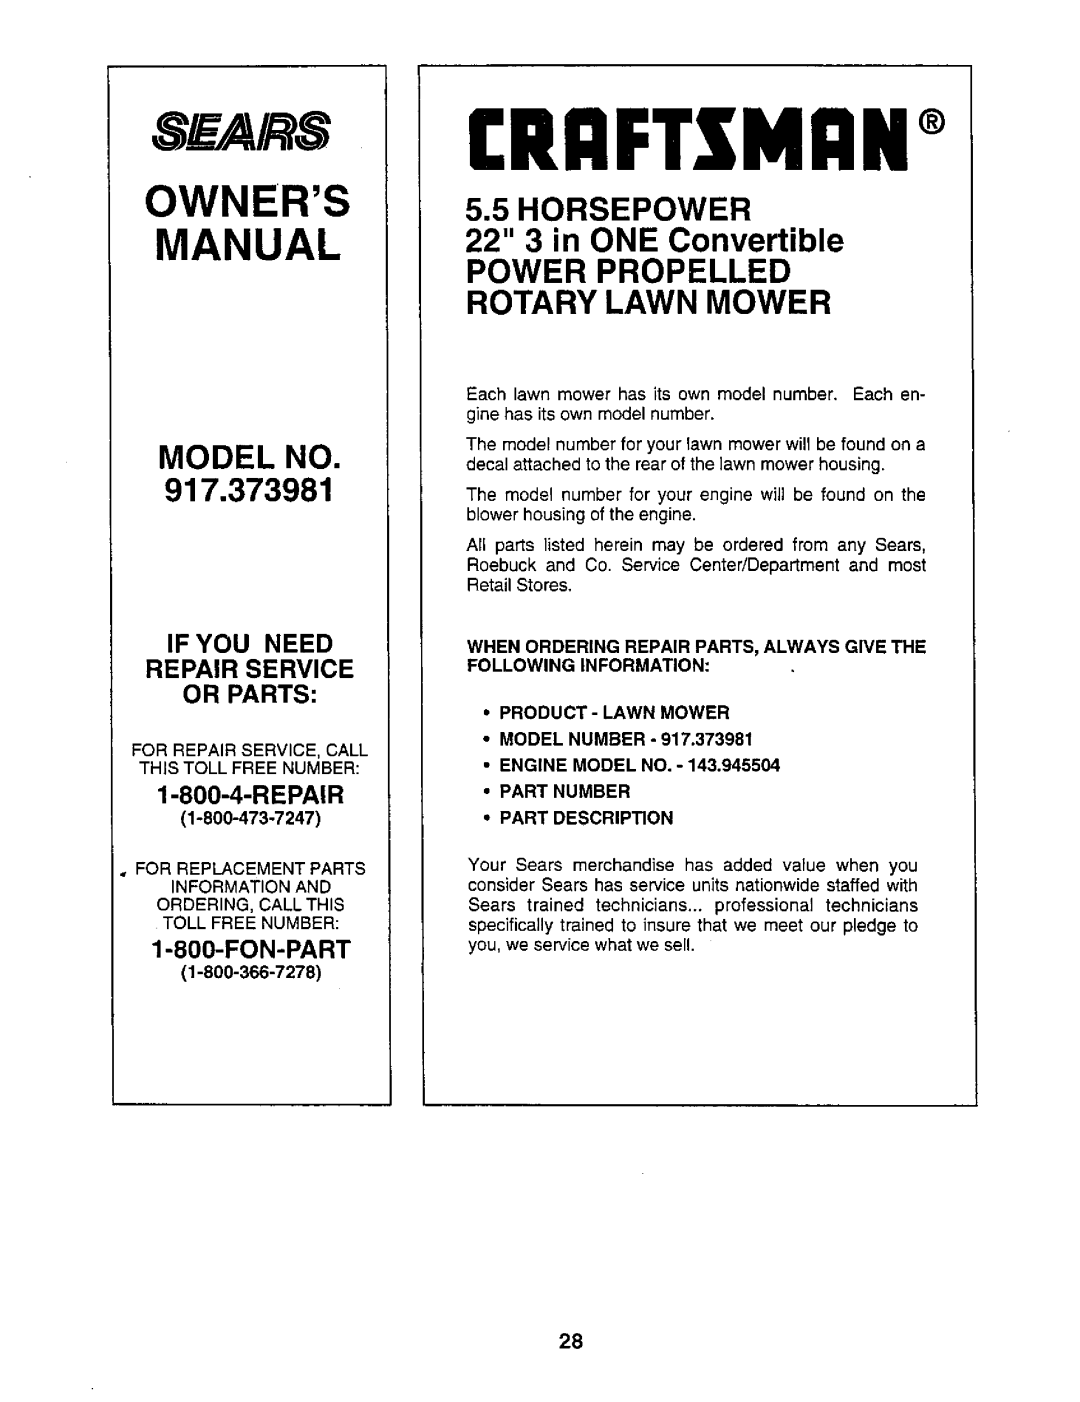 Sears 917.373981 Manual, Model No, Horsepower, Power Propelled Rotary Lawn Mower, RrlFTXMRN, Sf_/A/ S, Owners, Fon-Part 